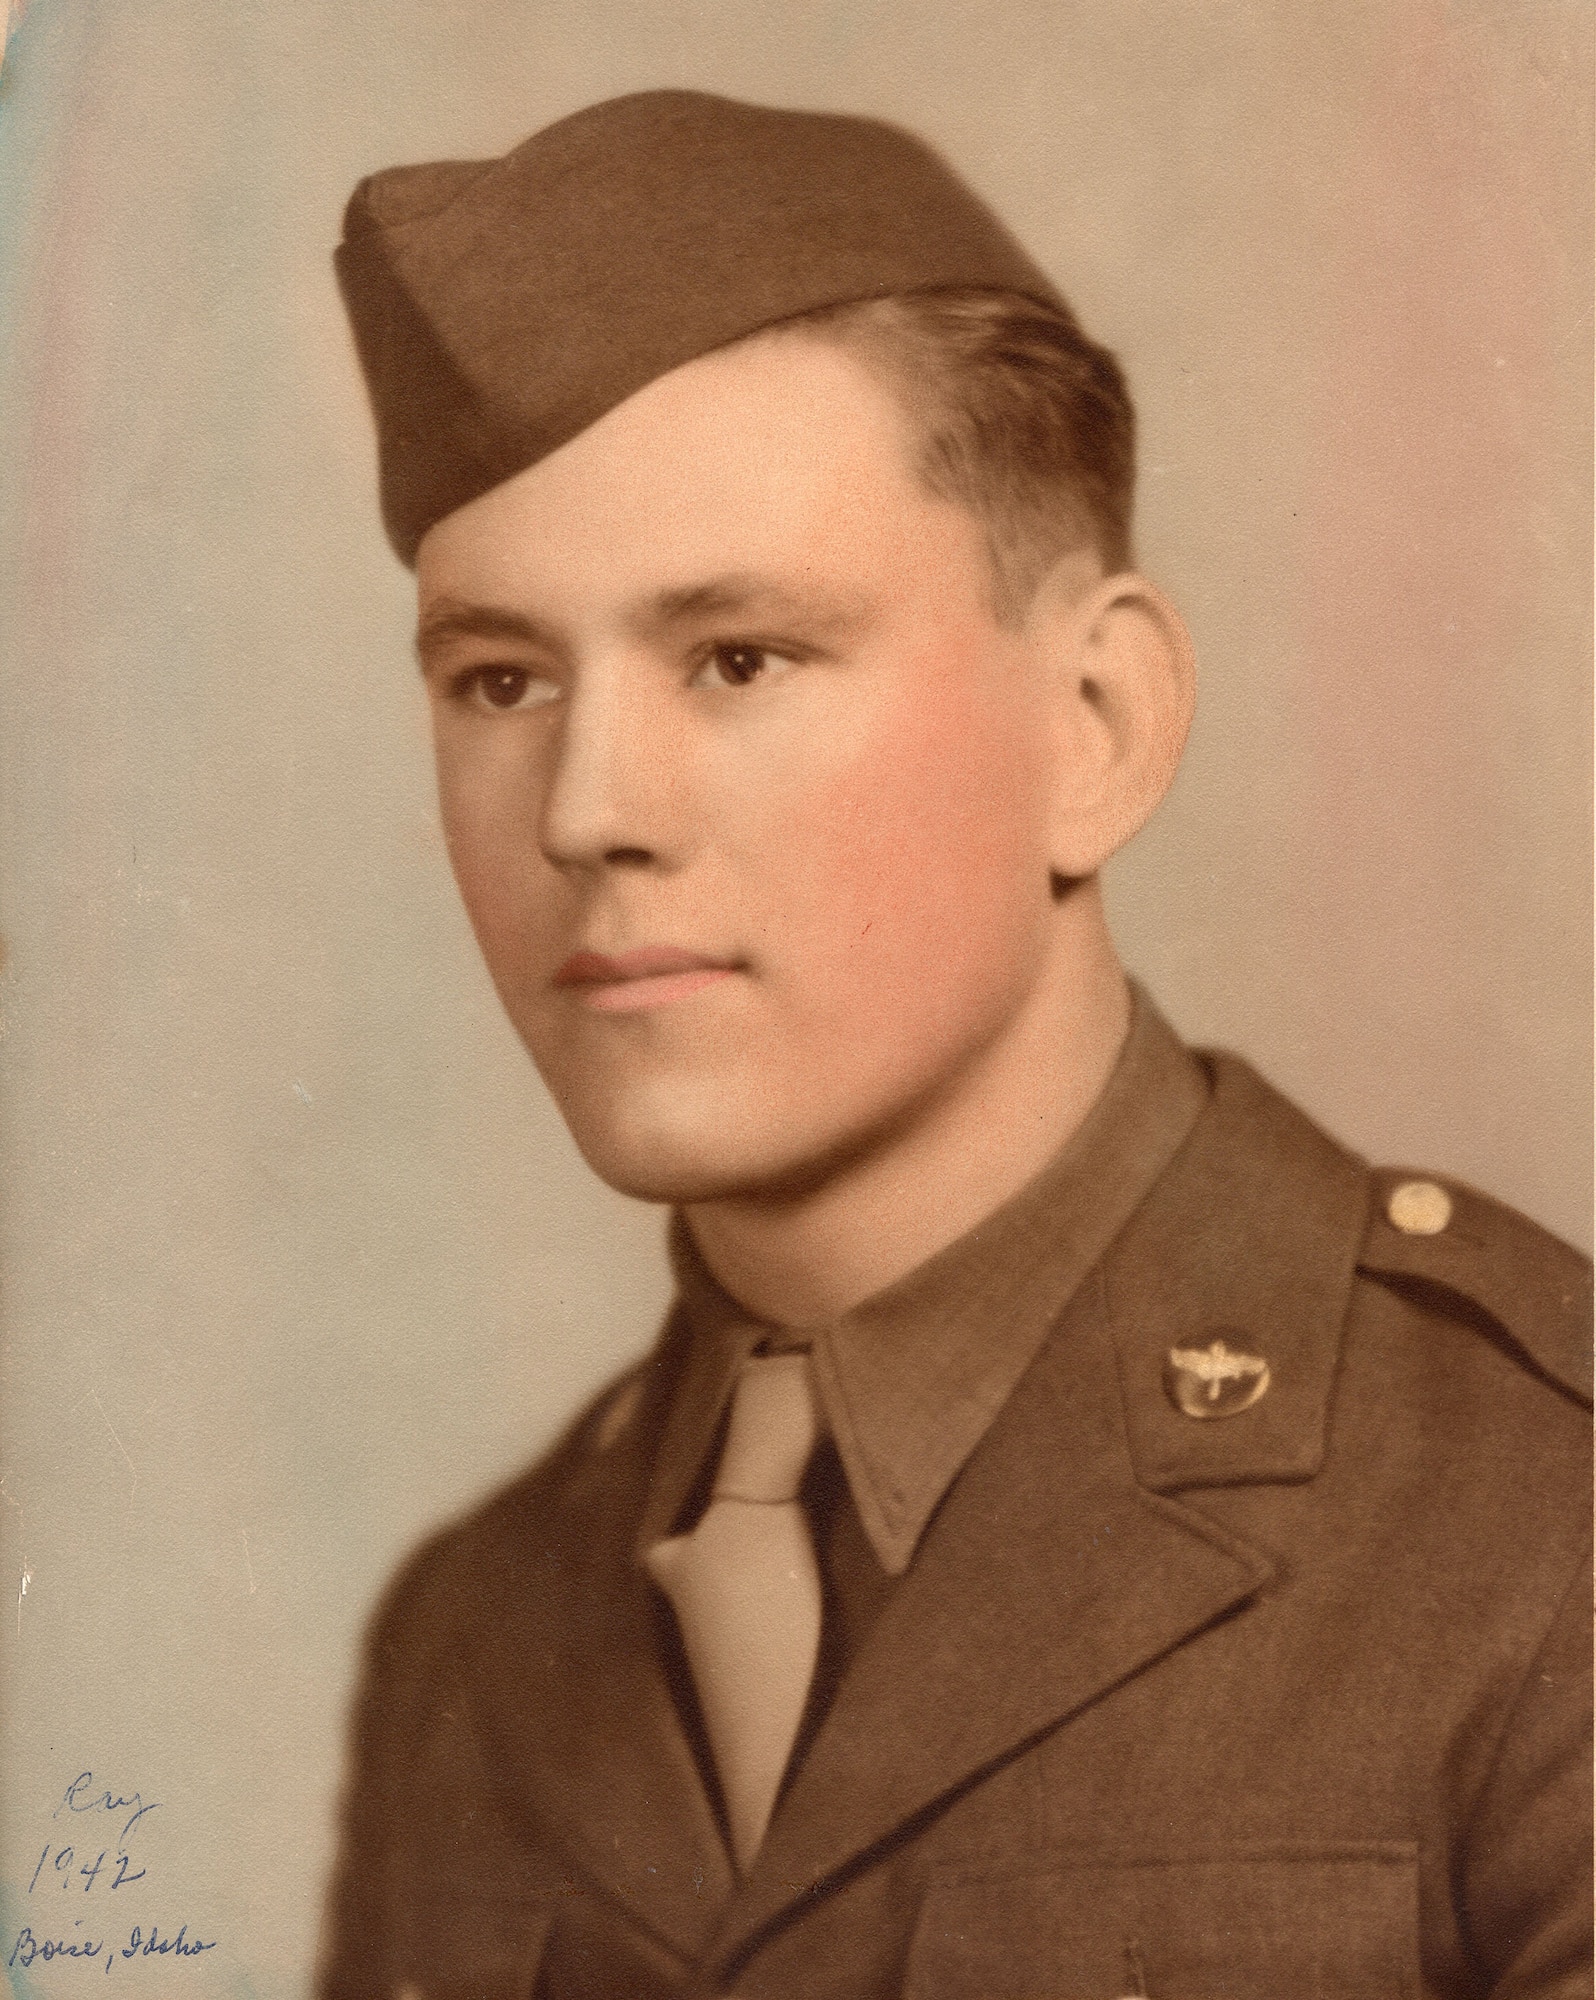 Dewey Christopher, now a retired master sergeant and veteran of World War II and the 100th Bombardment Group and 351st Bomb Squadron, poses for his official photo in his Class A uniform in 1942. Christopher was a crew chief with the 100th Bombardment Group and 351st Bomb Squadron at Thorpe Abbotts, Diss, England, during World War II. He visited RAF Mildenhall in June 2019, when the Professional Development Center was renamed in his honor, and while here shared stories from his military days. (Courtesy photo)